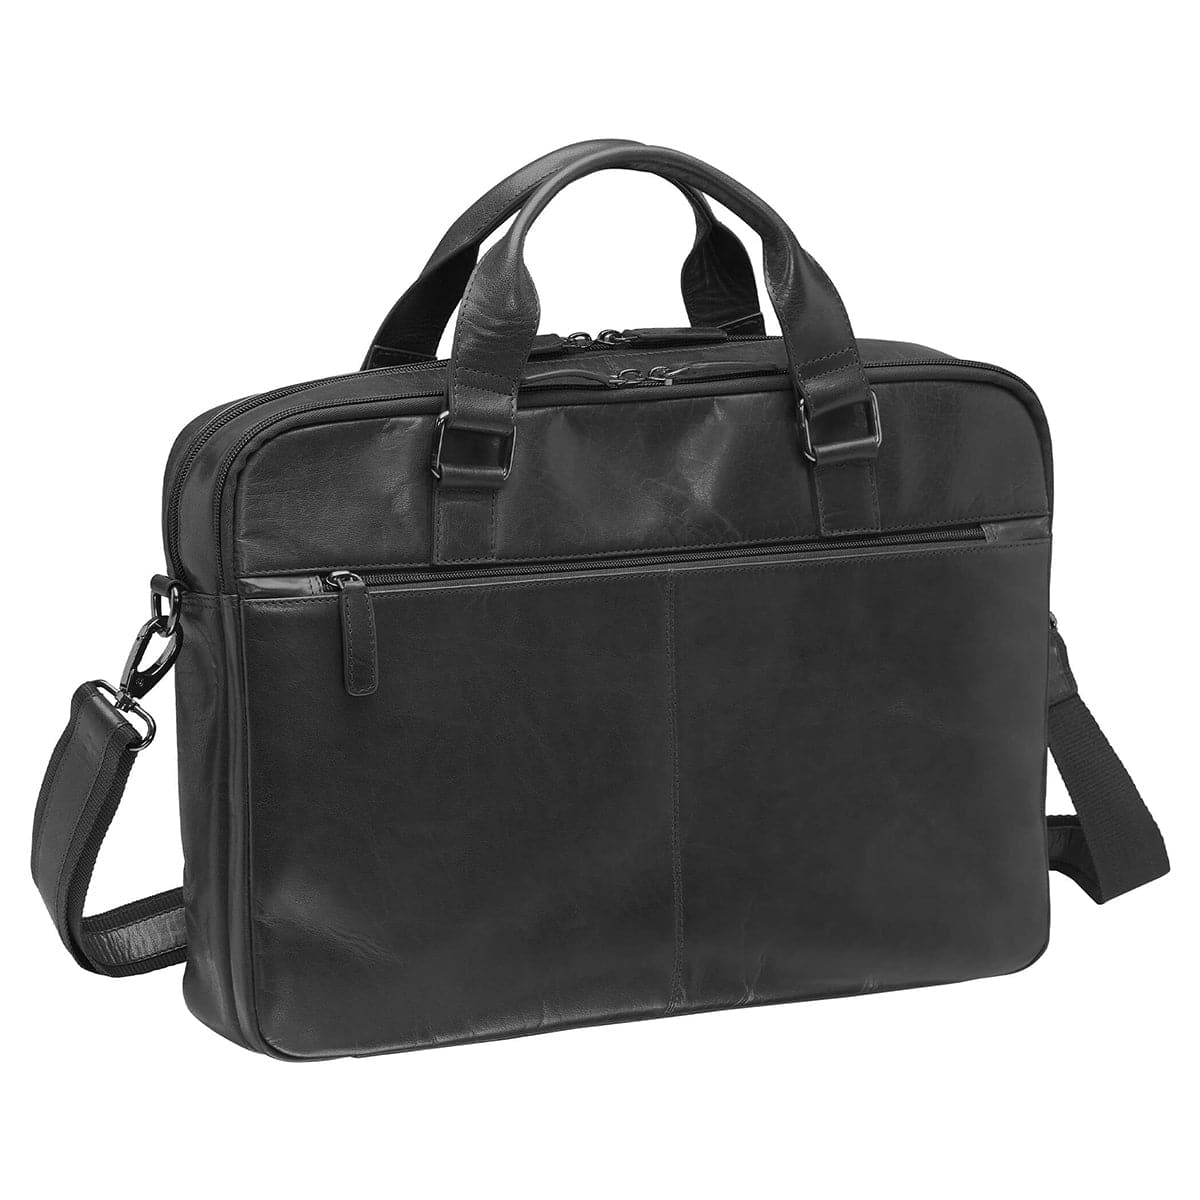 Mancini Buffalo Briefcase with Dual Compartments for 15.6" Laptop